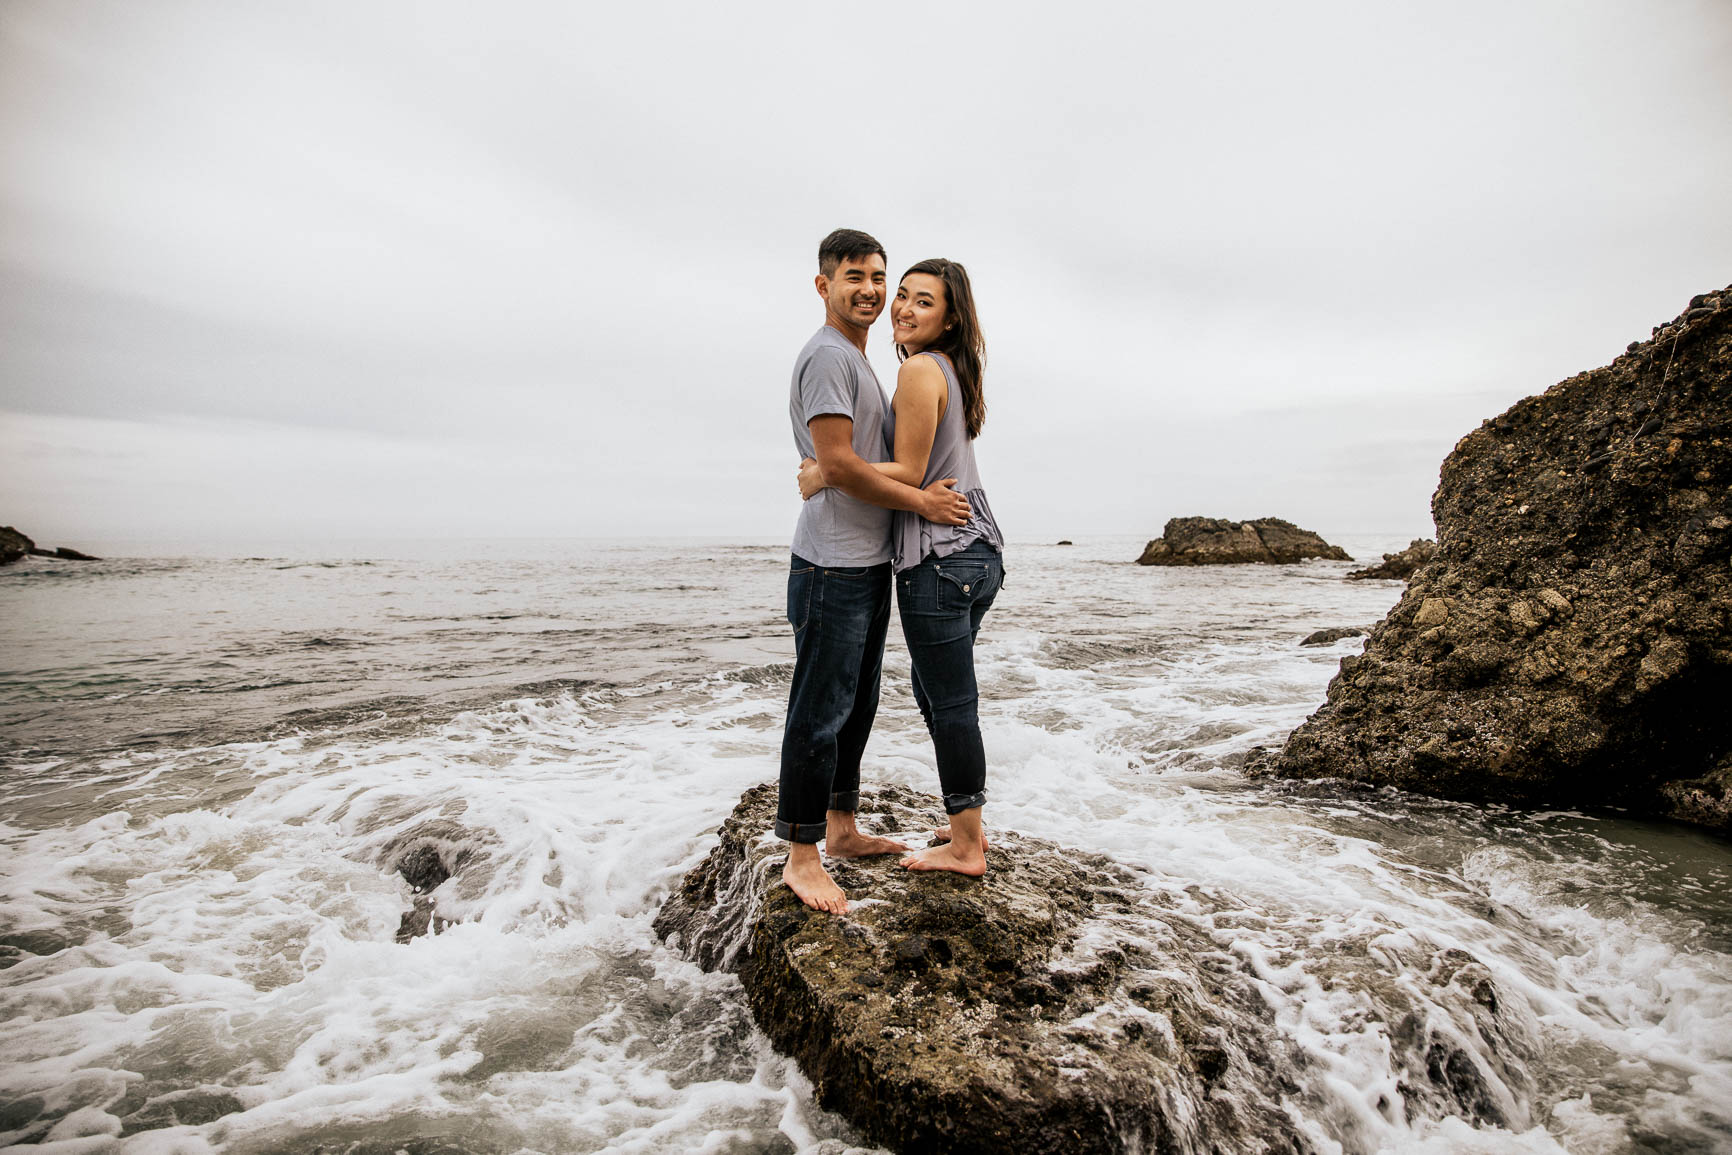 newly engaged couple wears matching outfits on laguna beach for an engagement session shot by nhieu tang | nhieutang.com